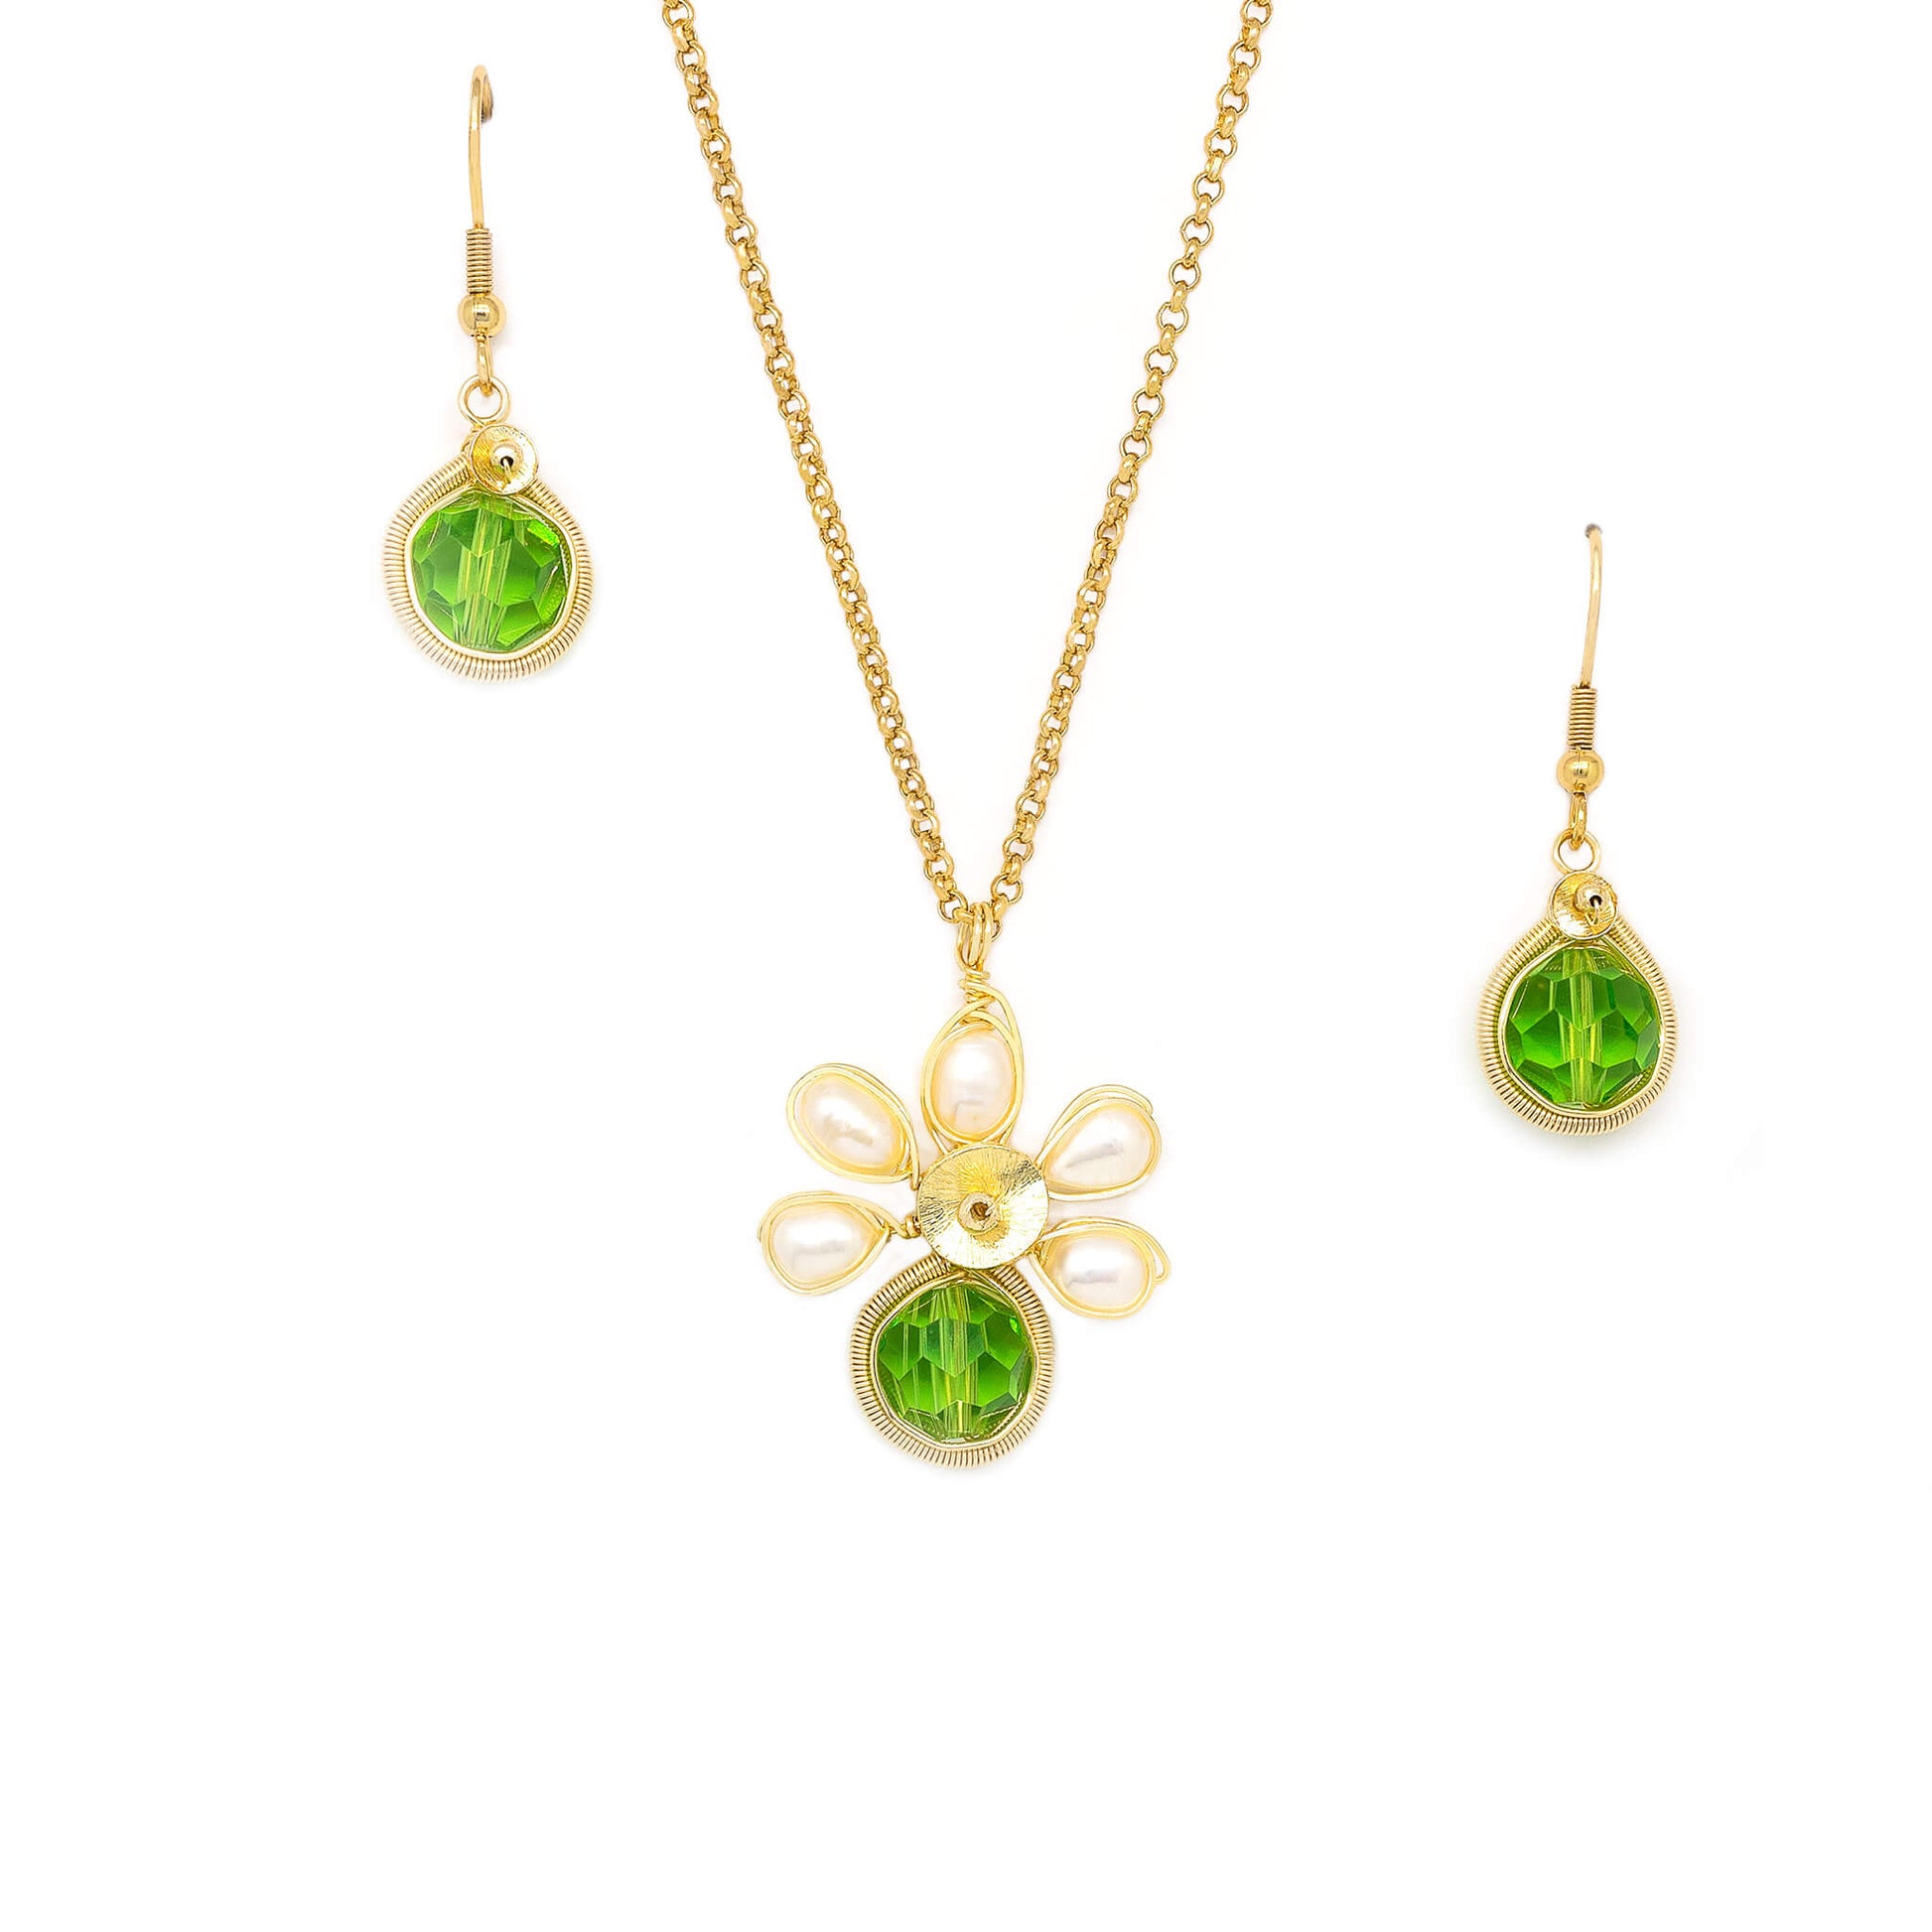 August Birthstone Crystal Necklace.-Earrings Set. Green Crystals, Fresh Water Pearls  and Gold Set. 22K Gold Plated Chain. 